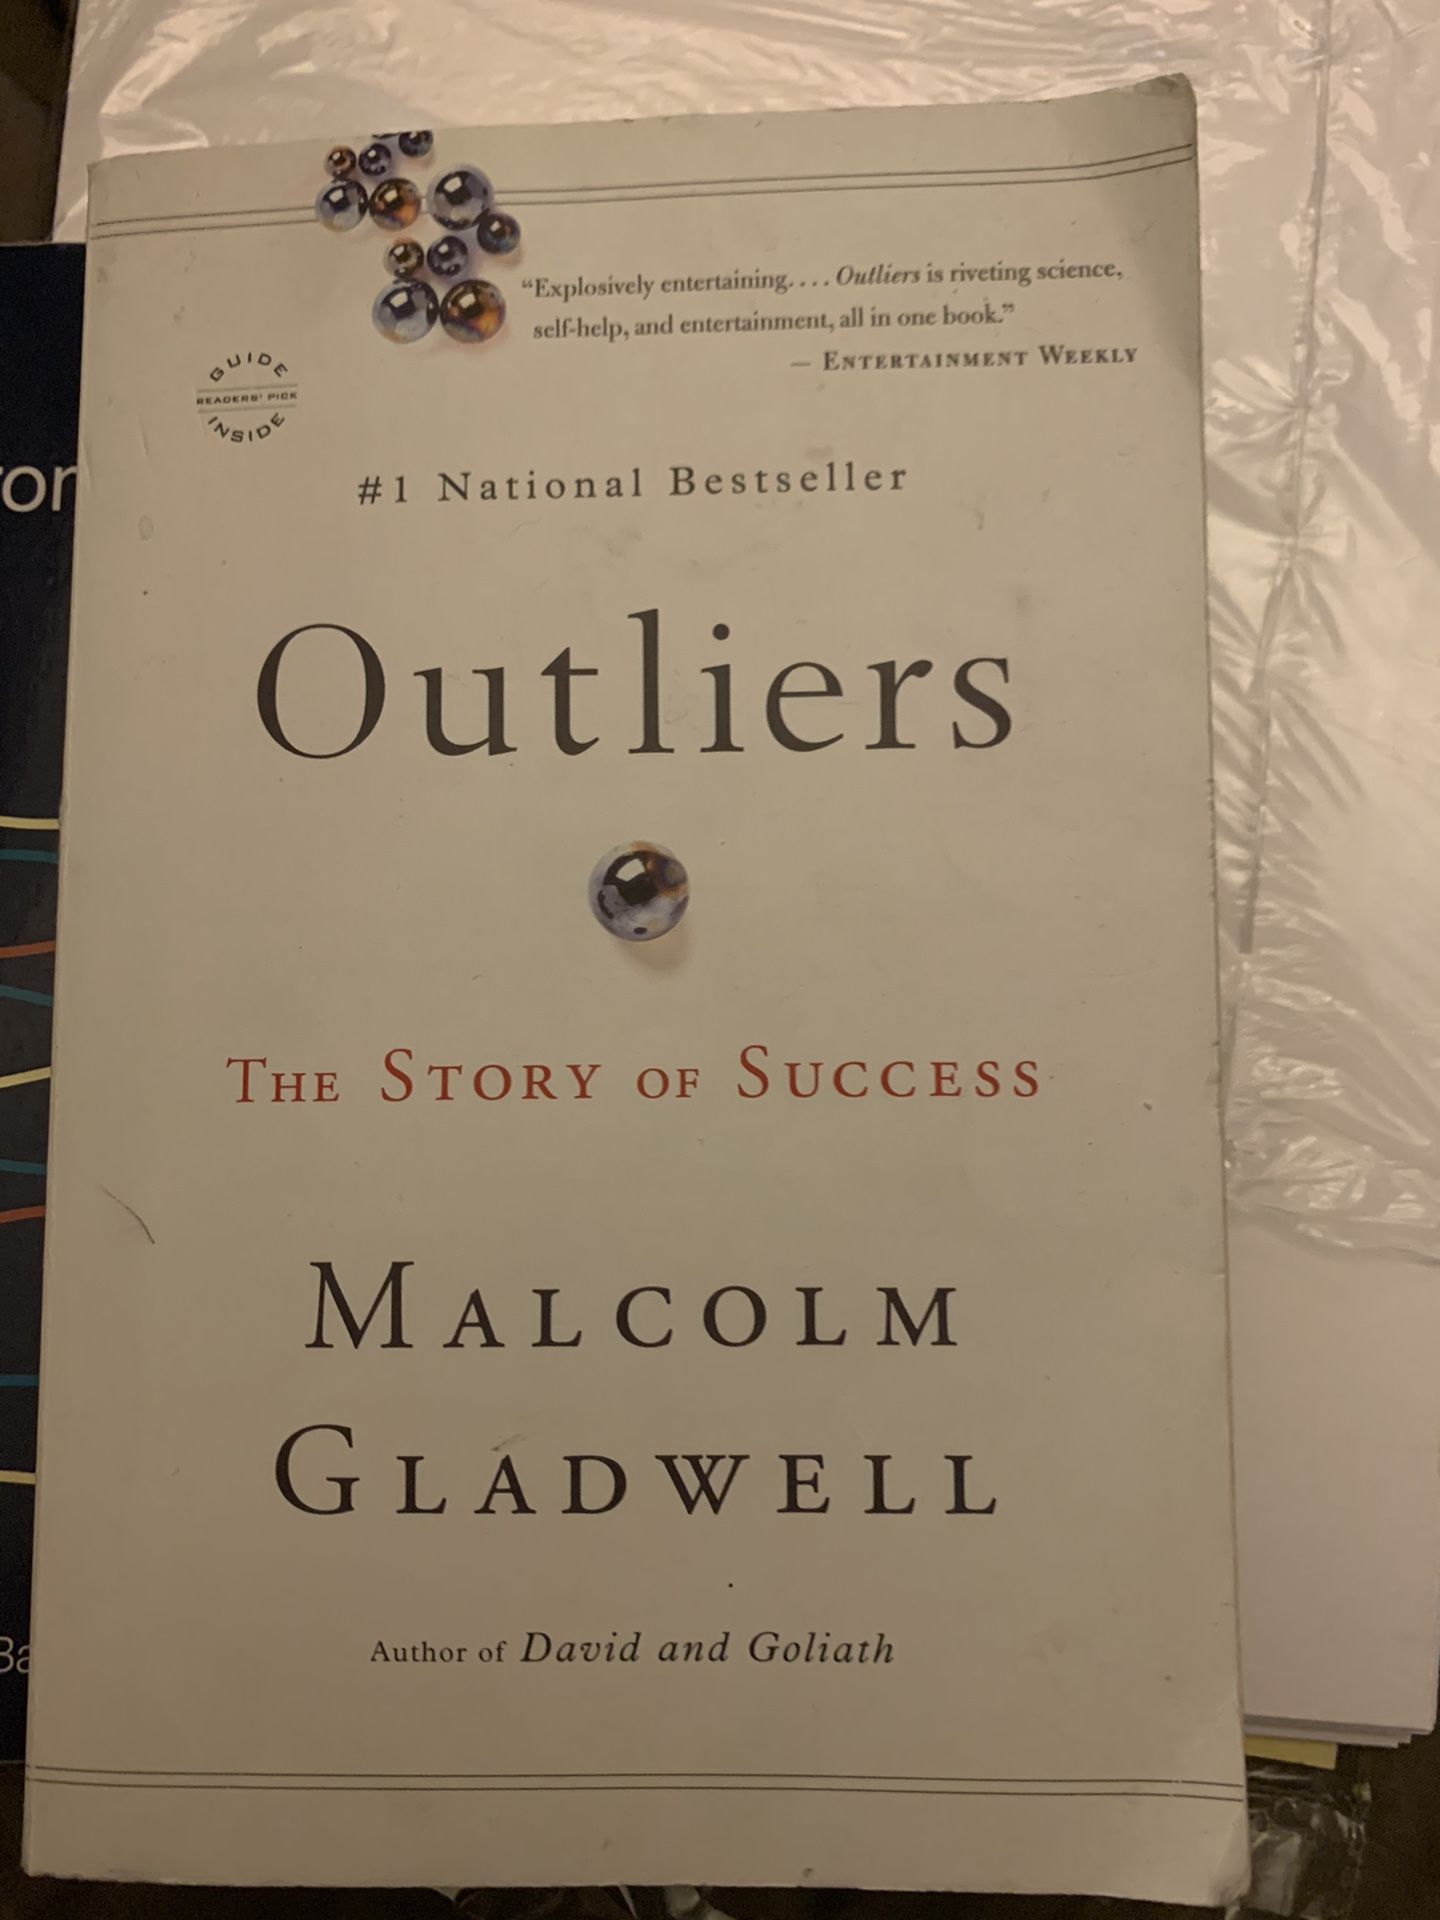 Outliers book by Malcolm Gladwell